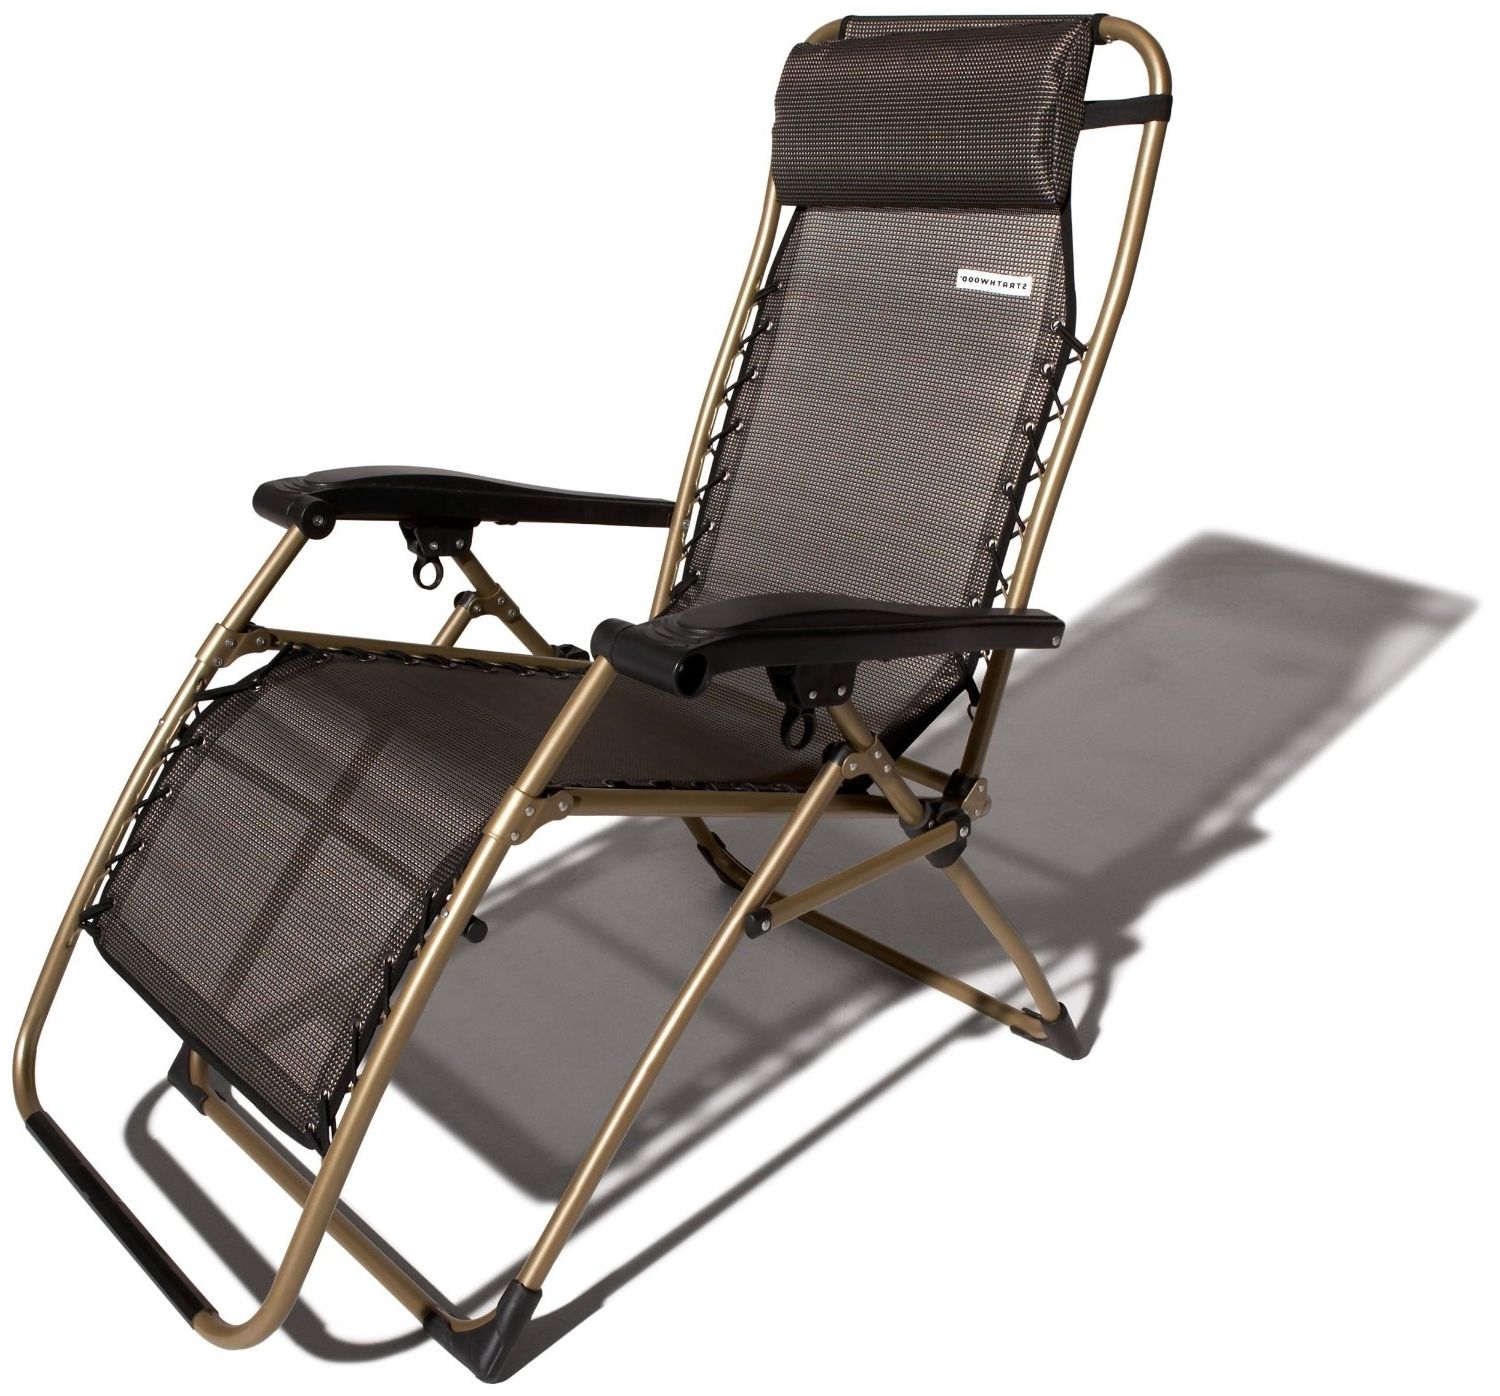 Elegant Patio Recliner Chair Patio Furniture Chaise Lounge Intended For Famous Adjustable Pool Chaise Lounge Chair Recliners (View 4 of 15)